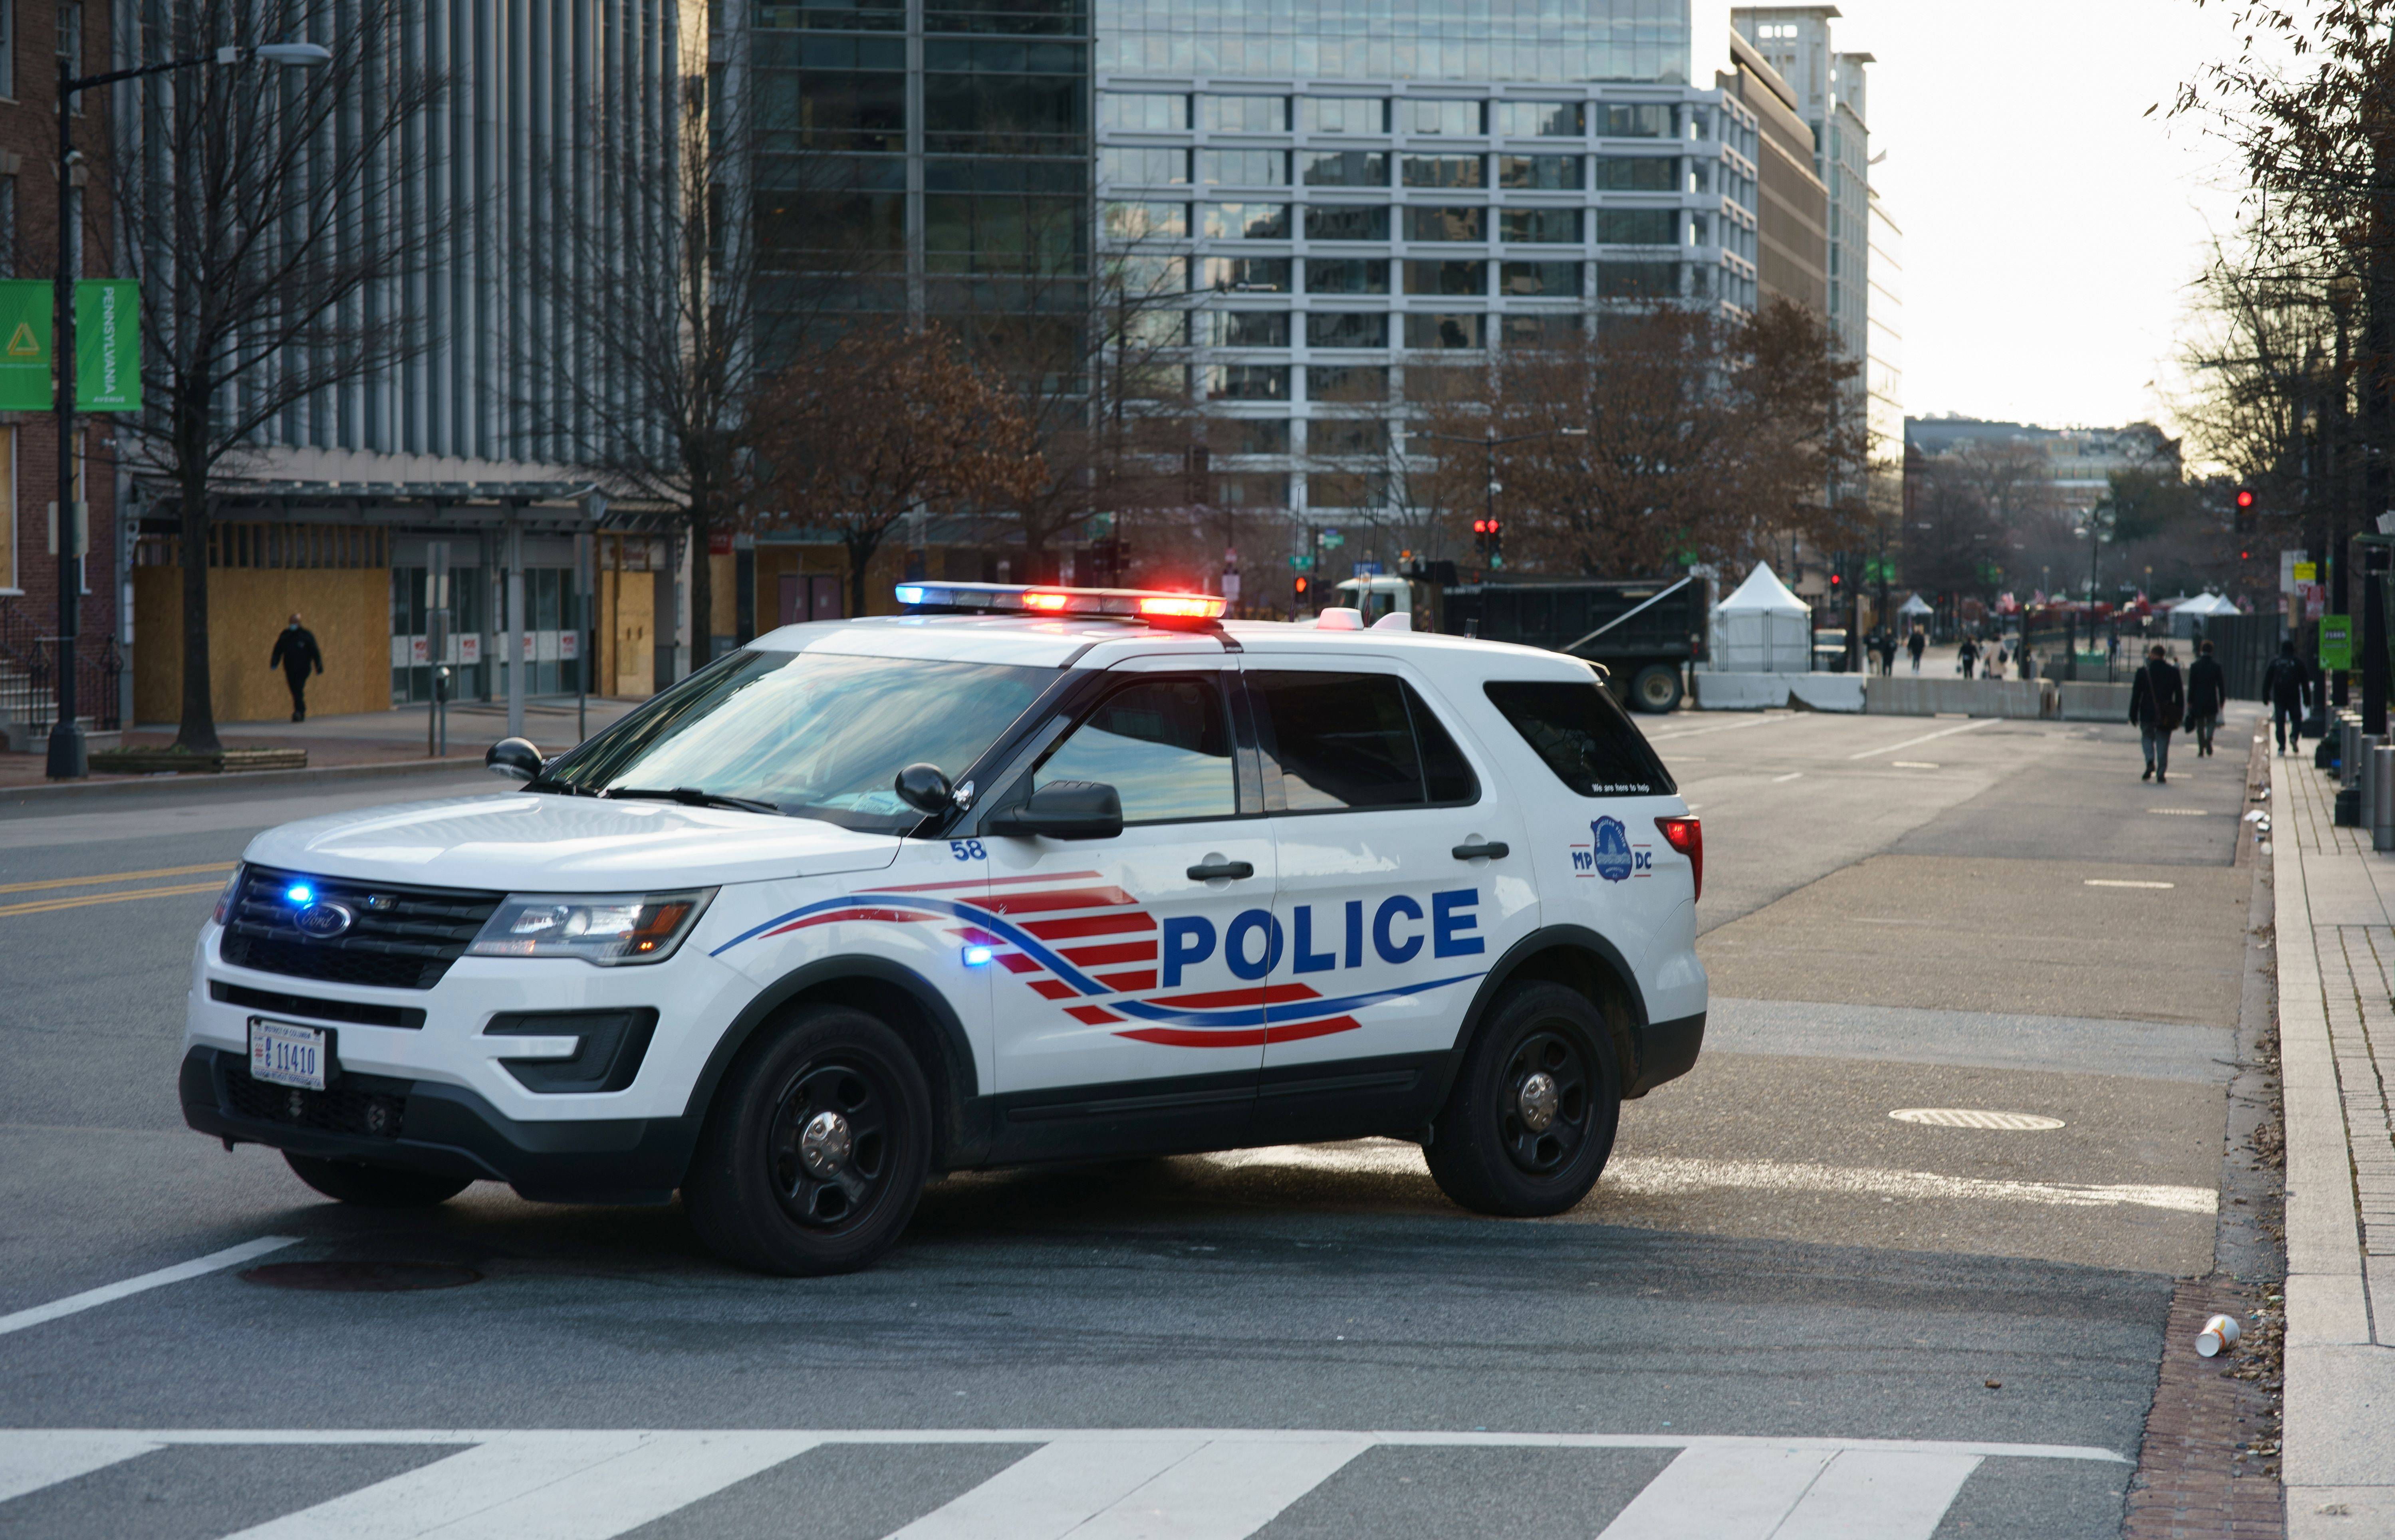 A DC police car blocks Pennsylvania Avenue leading to the White House in Washington, DC on January 19, 2021. - President Donald Trump began his final full day in the White House on January 19, 2021 with a long list of possible pardons to dish out before snubbing his successor Joe Biden's inauguration and leaving for Florida. On January 20, 2021 at noon, Biden will be sworn in and the Trump presidency will end, turning the page on some of the most disruptive, divisive years the United States has seen since the 1960s. (Photo by MANDEL NGAN / AFP) (Photo by MANDEL NGAN/AFP via Getty Images)